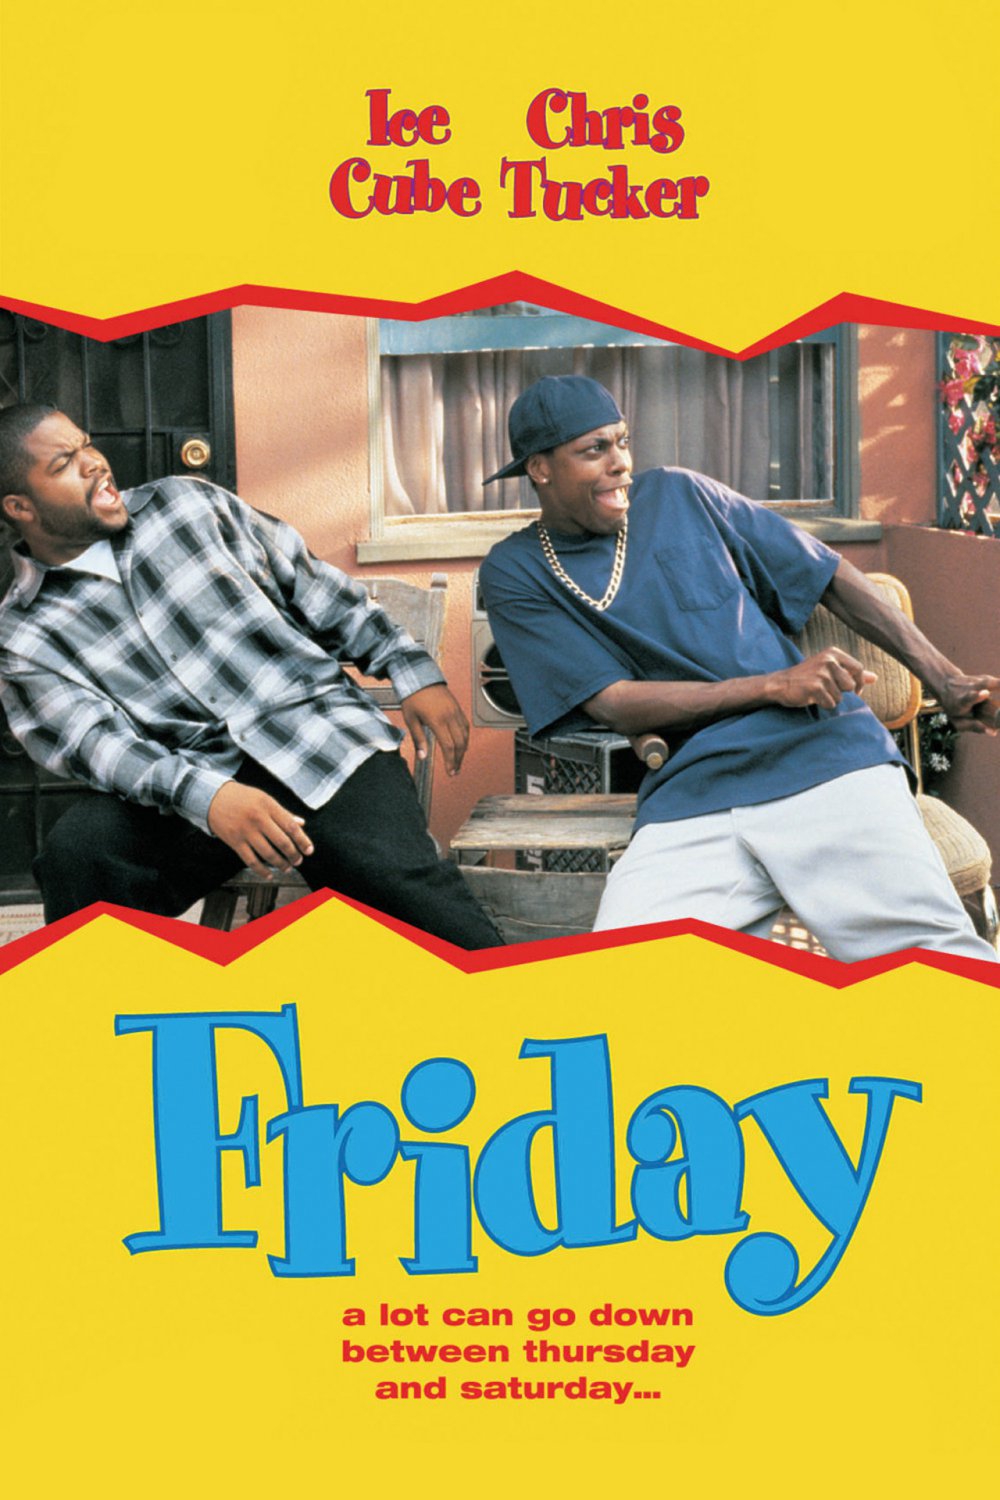 Friday TV Show Poster 13x19 inches